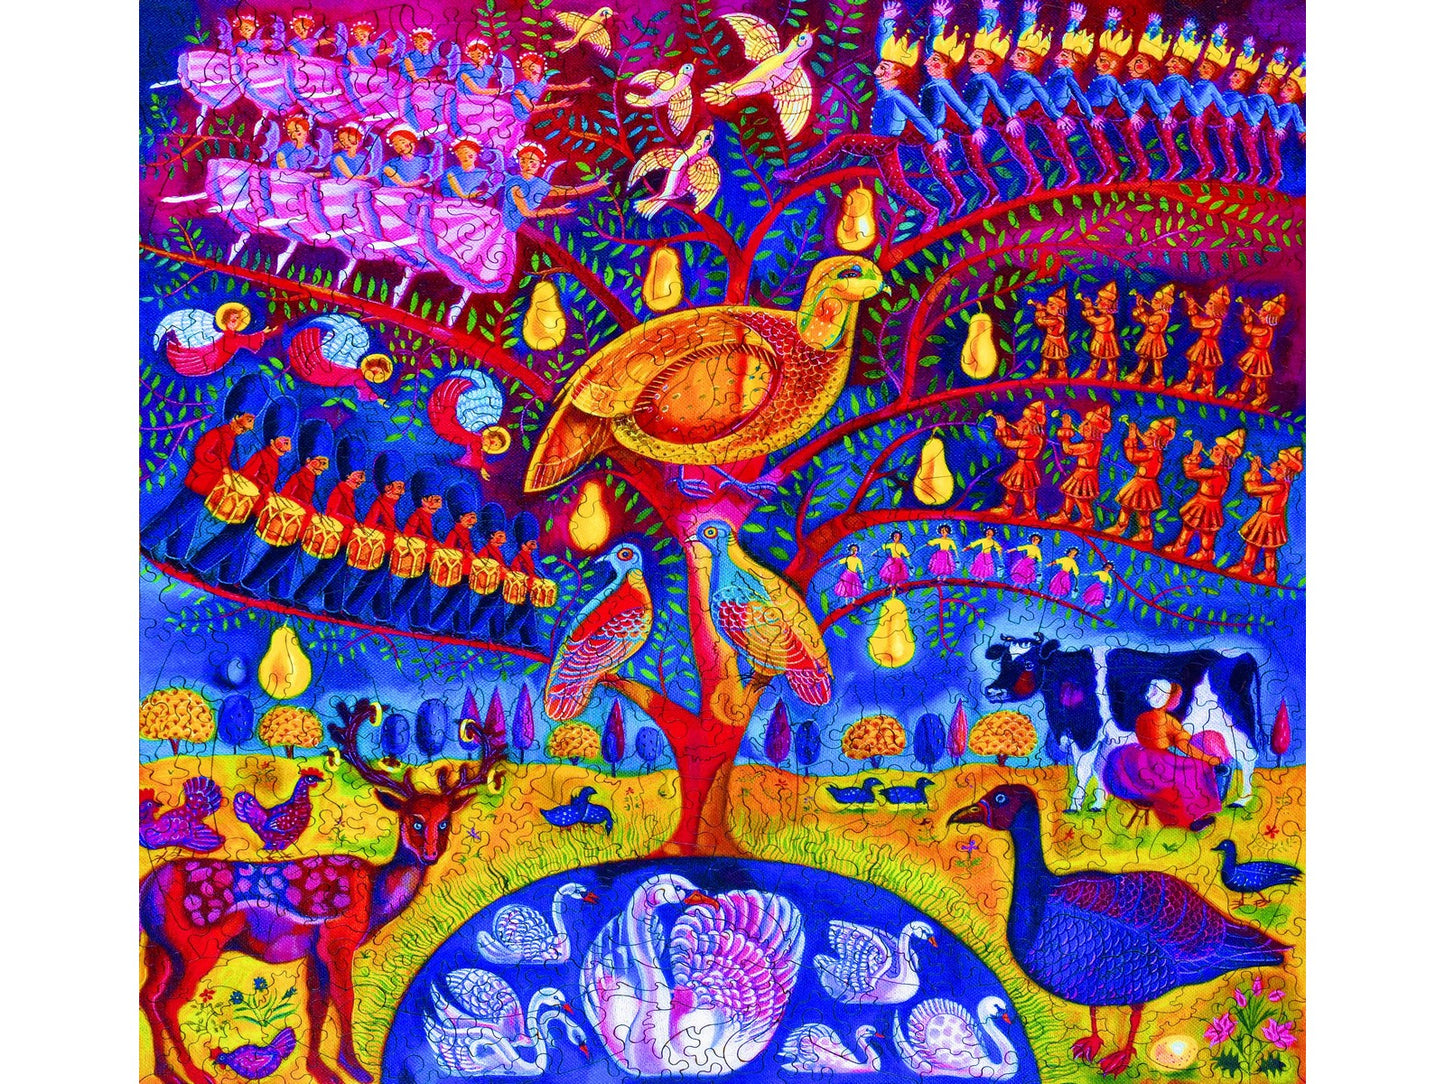 The front of the puzzle, The Twelve Days of Christmas, which shows a bird in a tree, surrounded by various figures from the song, twelve days of christmas.